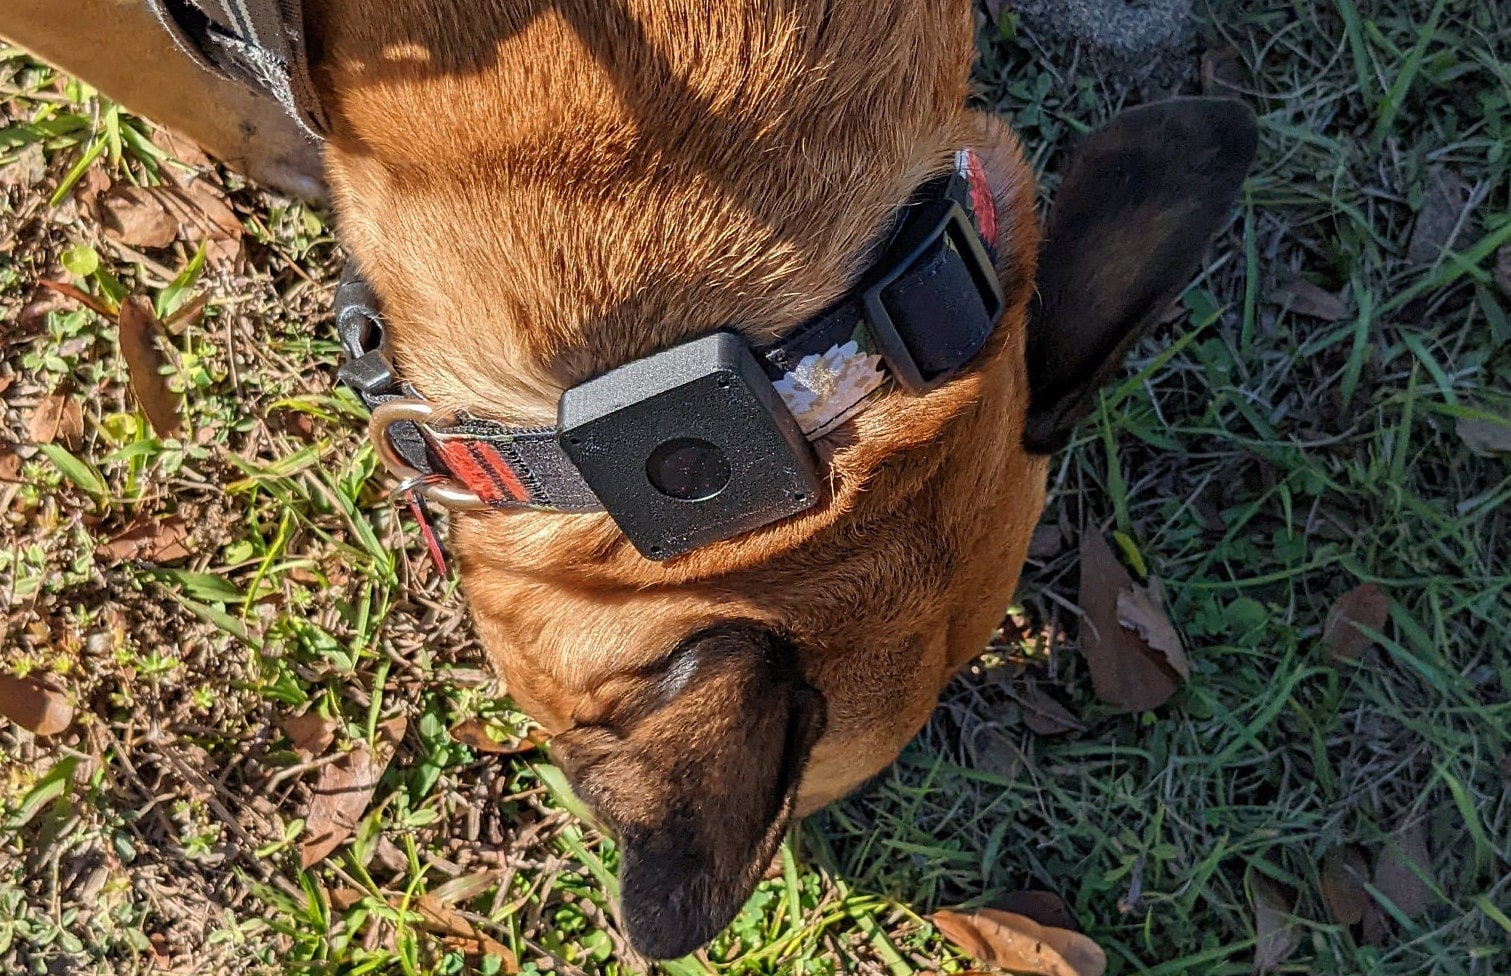 Samsung SmartTag collar mount by Kirk Makes Things